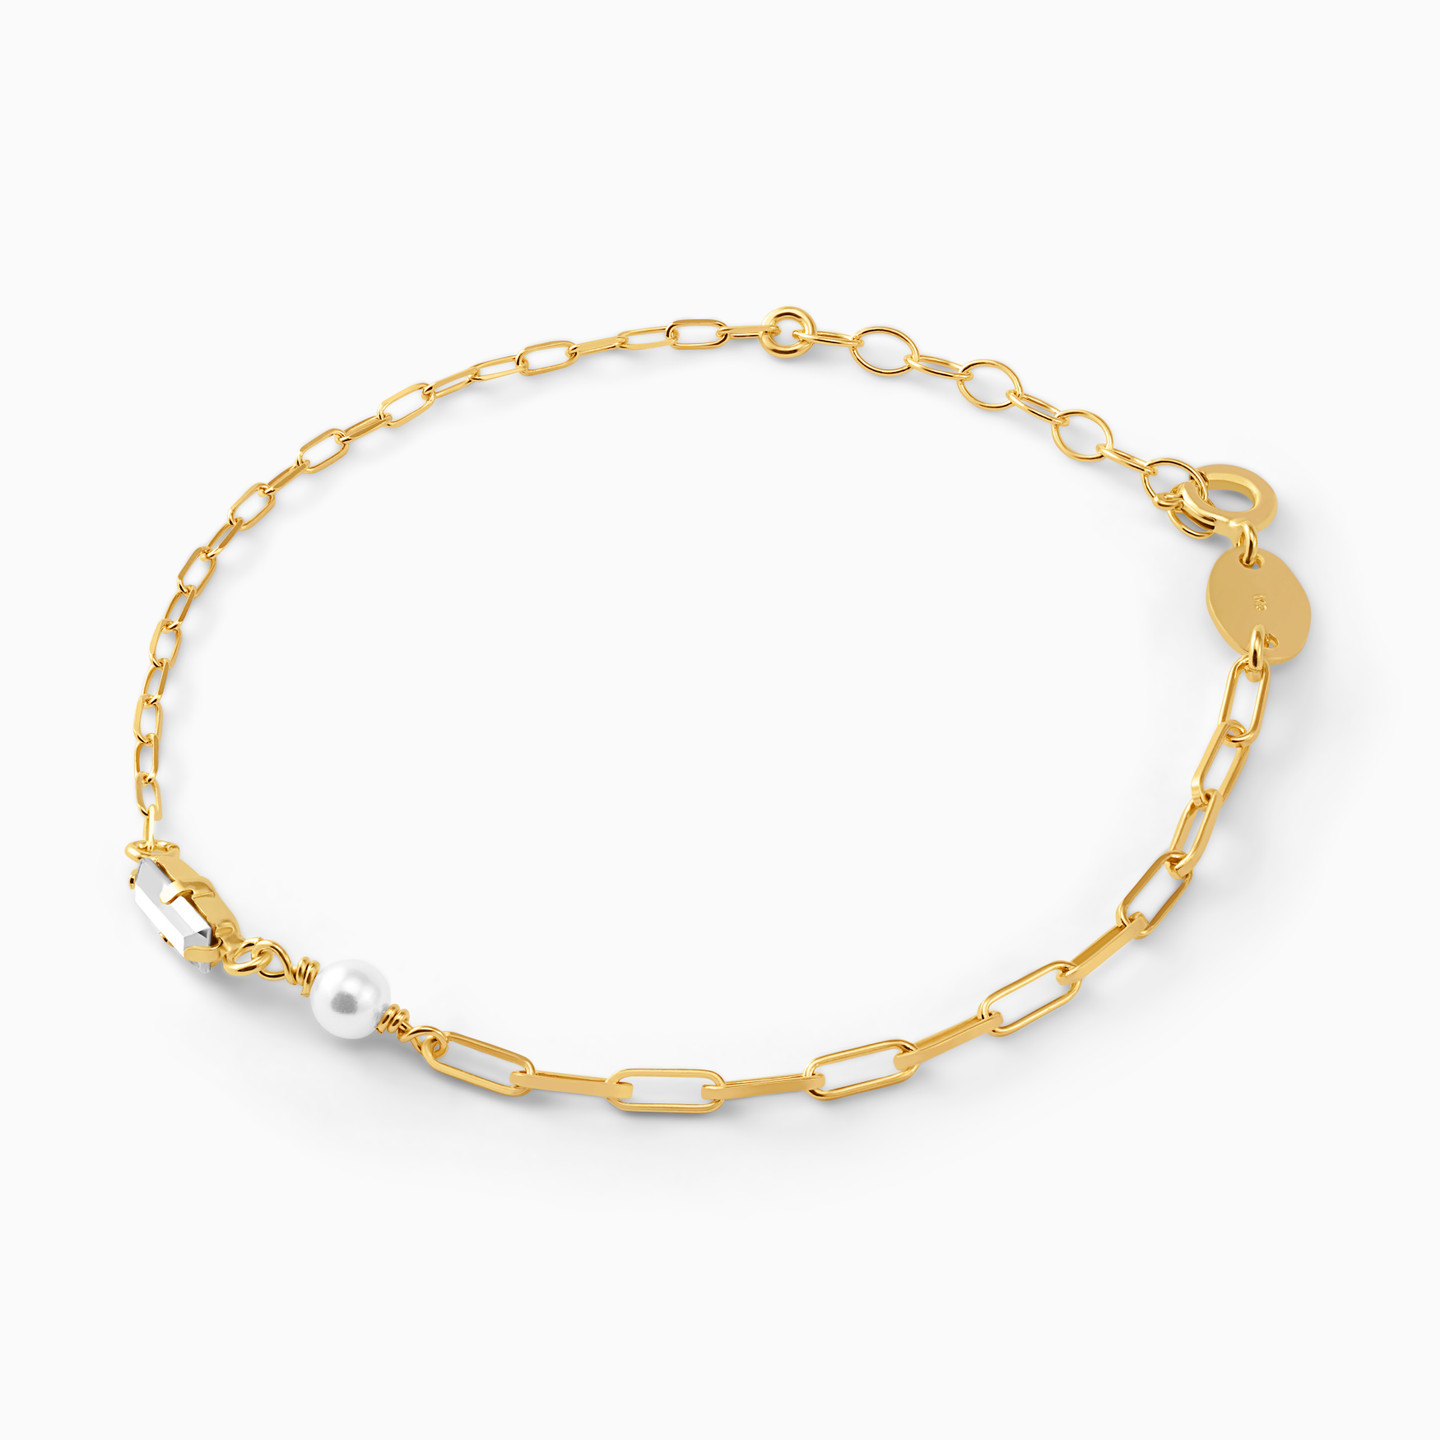 Gold Plated Colored Stones Chain Bracelet - 2